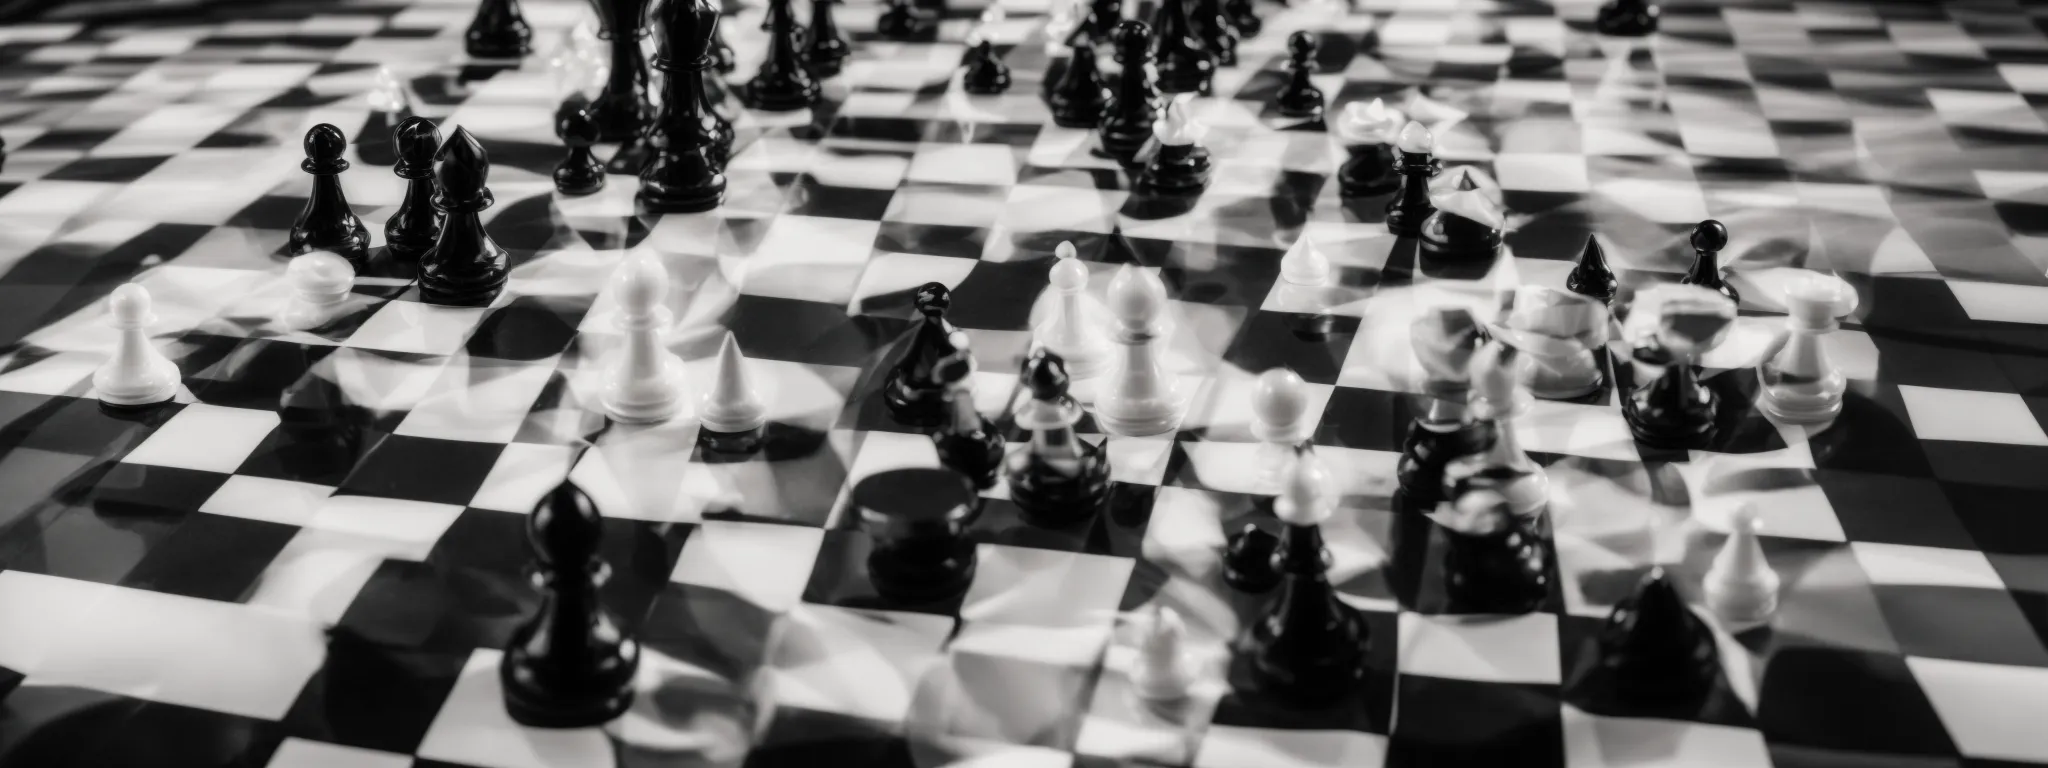 a chessboard with a gradient of pieces changing from white to black, symbolizing the spectrum of seo tactics from white to black hat with shades of gray in-between.